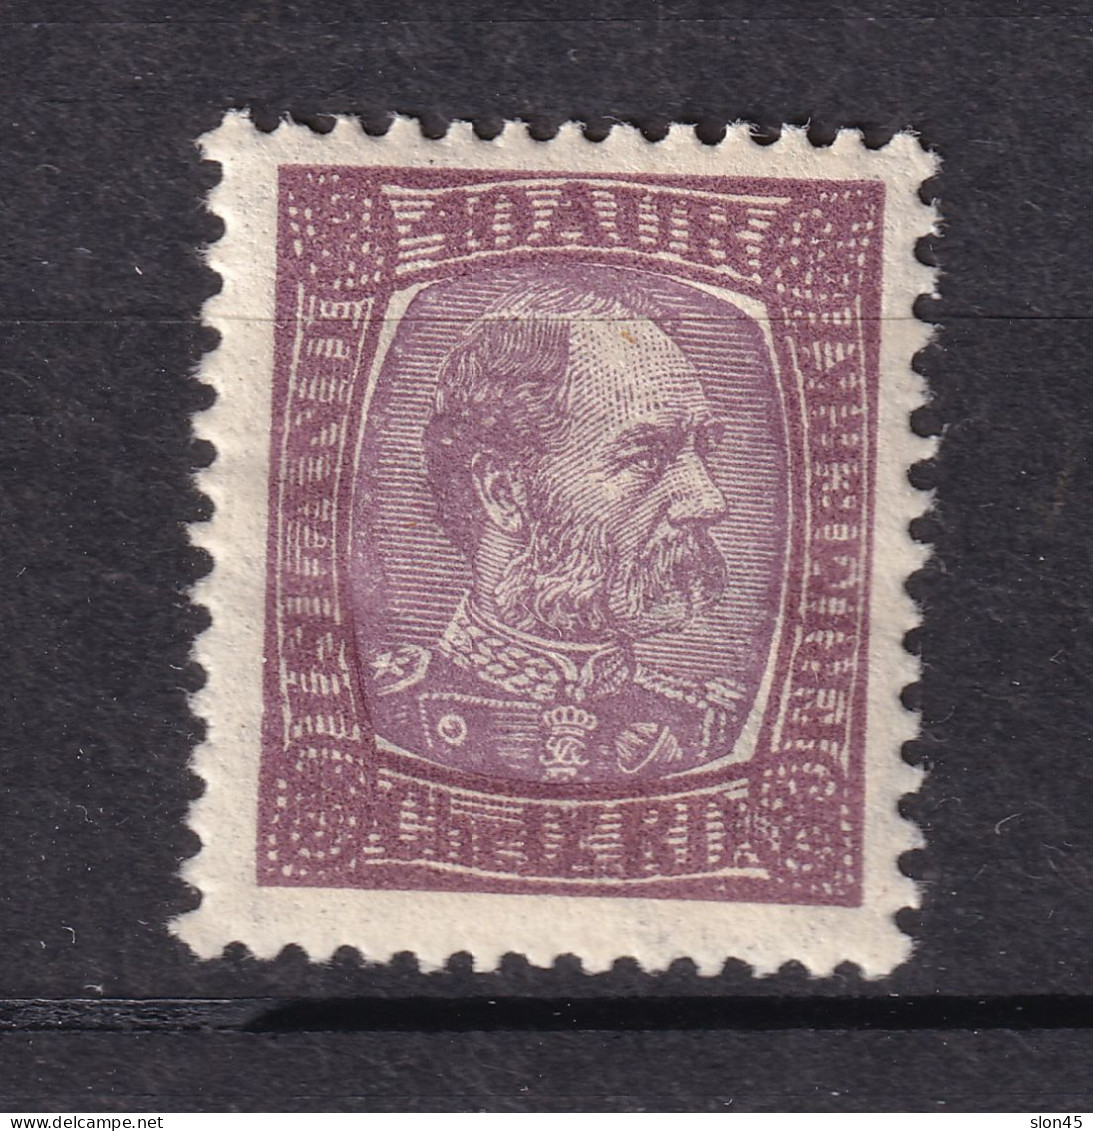 Iceland 1902 King Christian IX 40a MNH 15577 - Unused Stamps